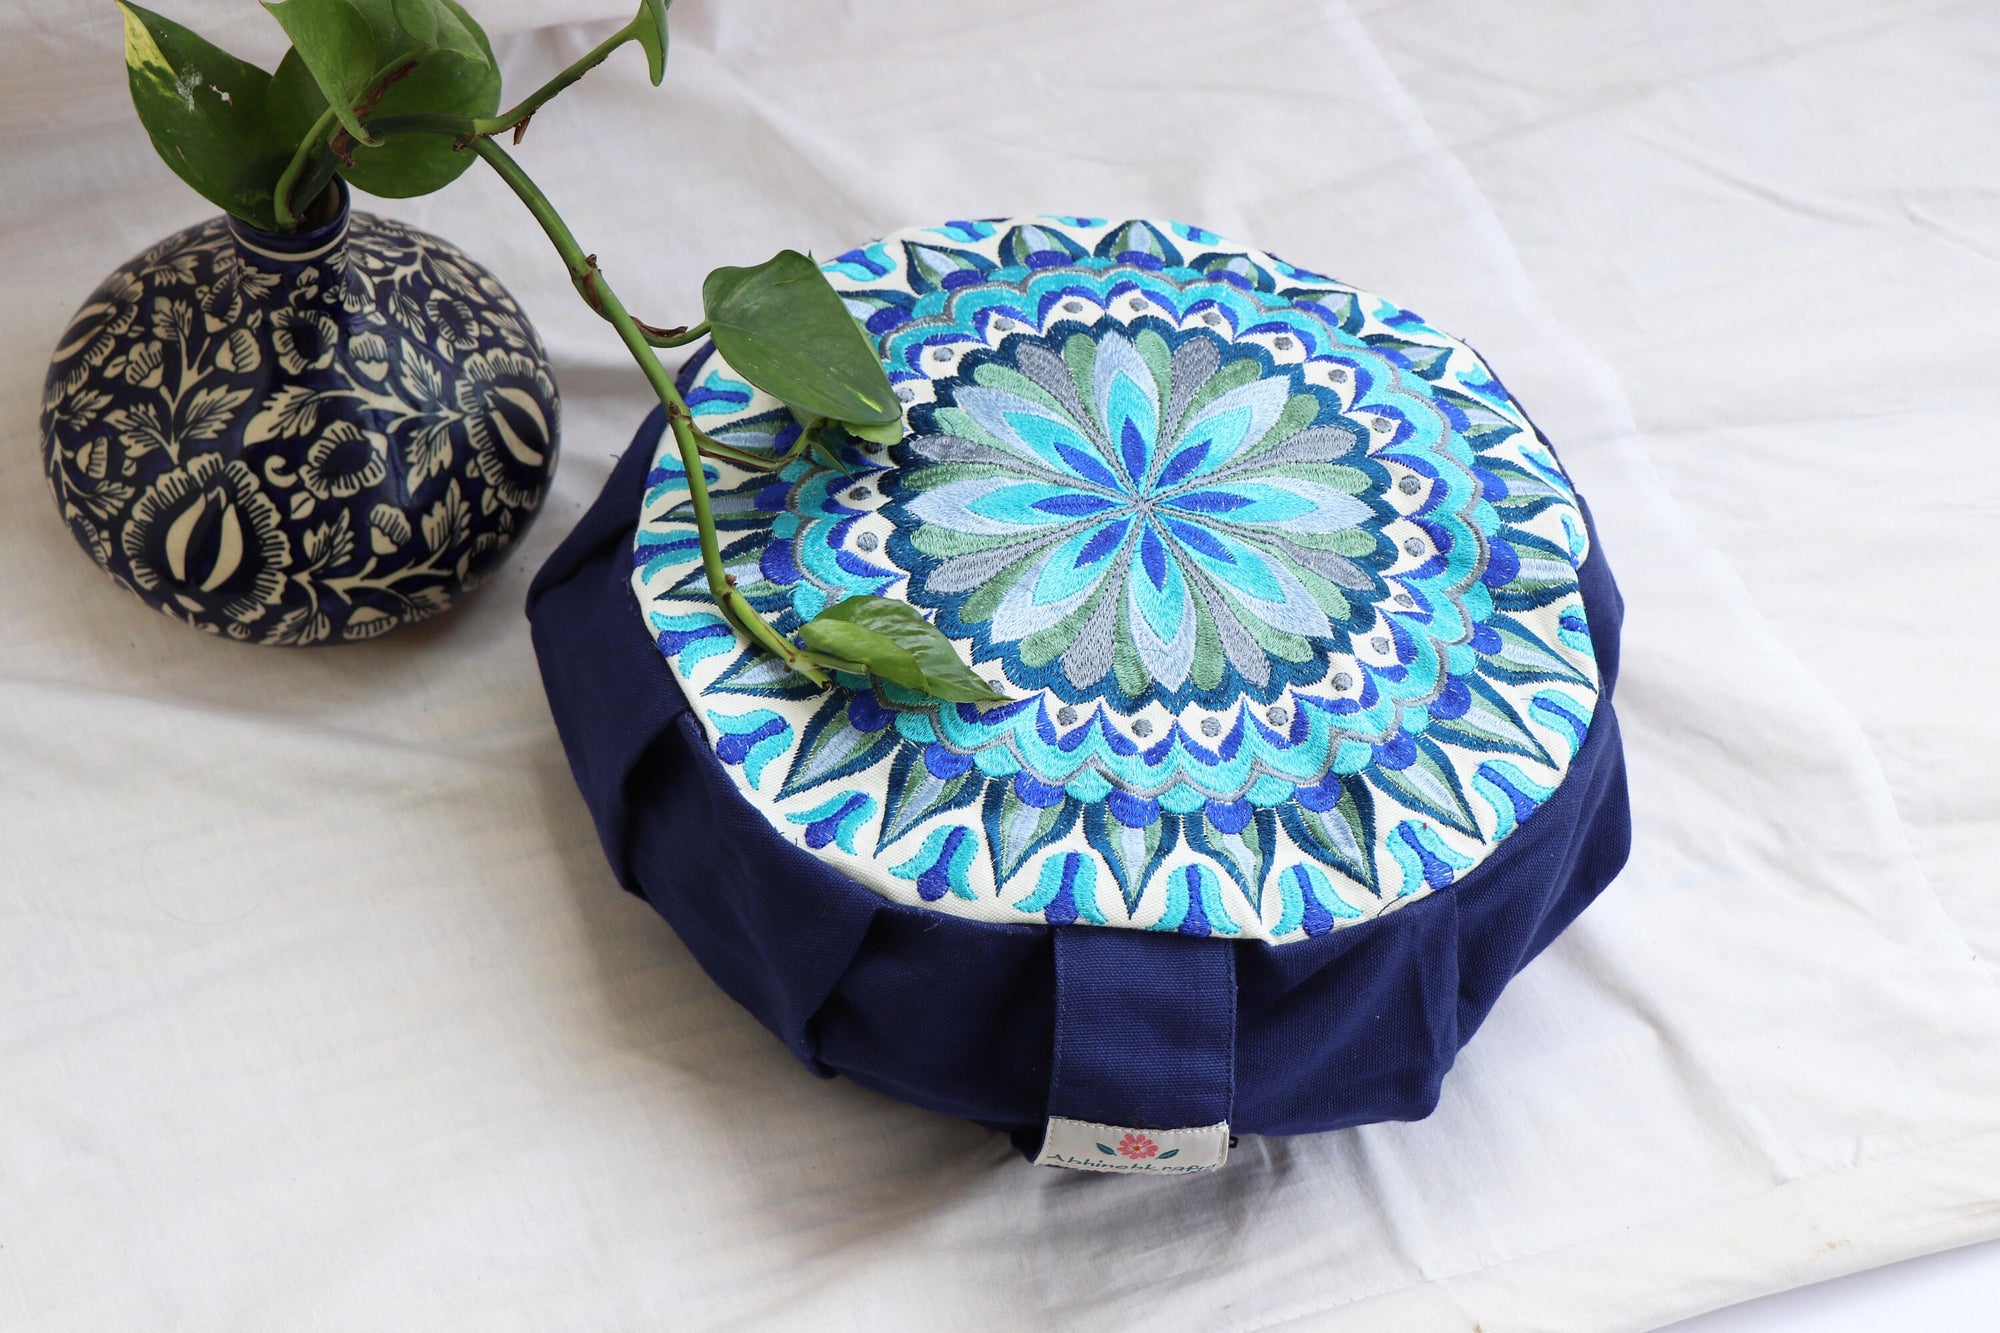 Embroidered Round Zafu Yoga Pillow |Zipped Cover |Washable| Portable - Size Medium - Mandala - Blue - Filling Options - Pre-Orders